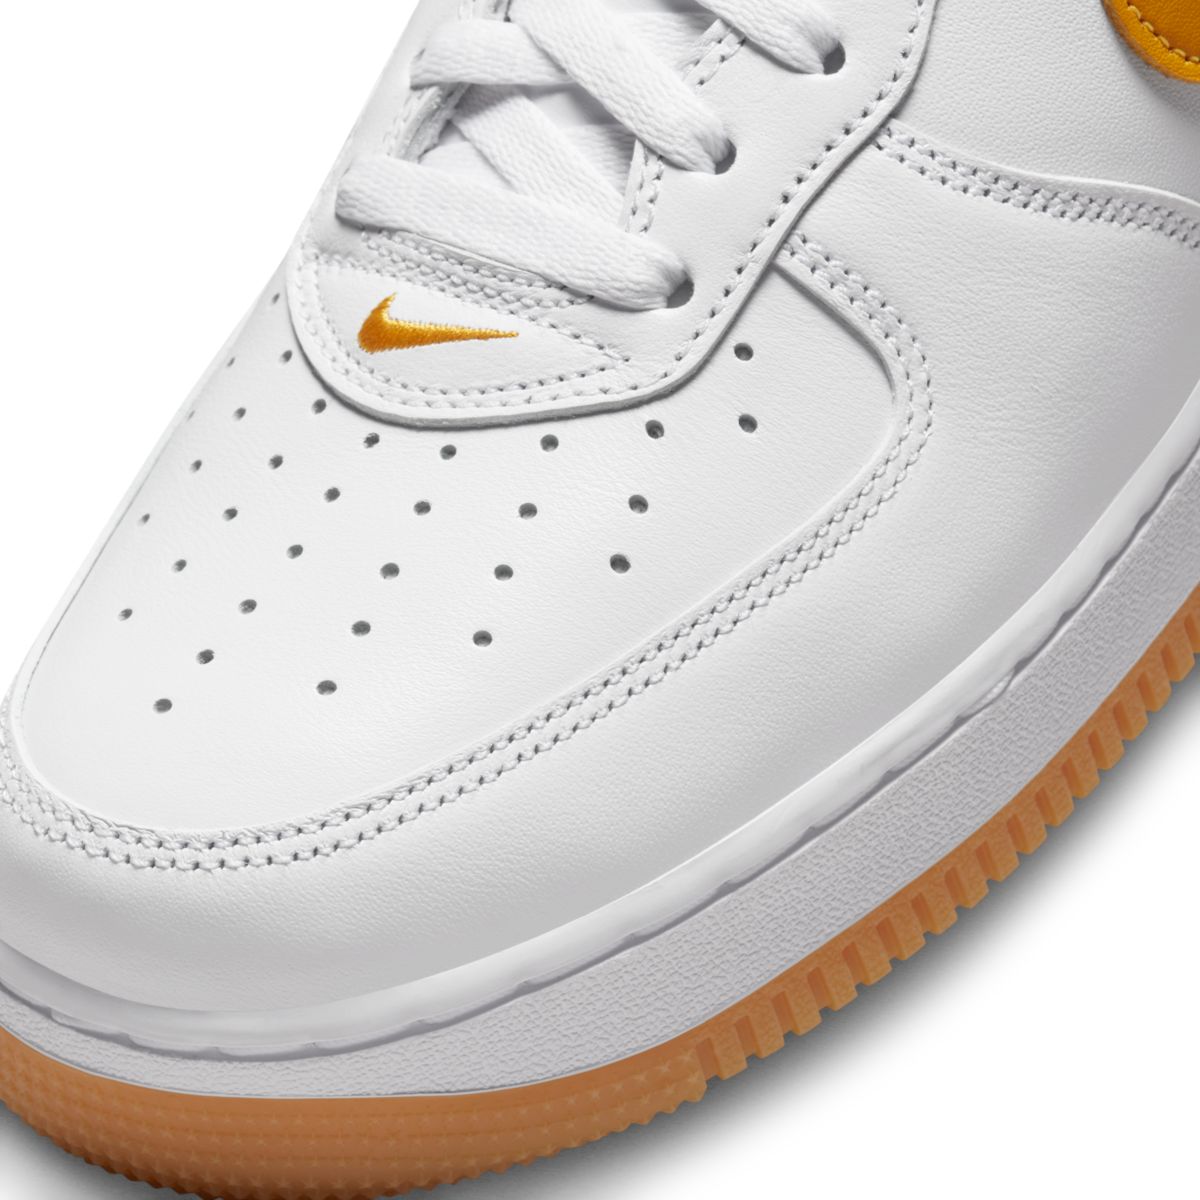 Nike Air Force 1 Low University Gold FD7039-100 H